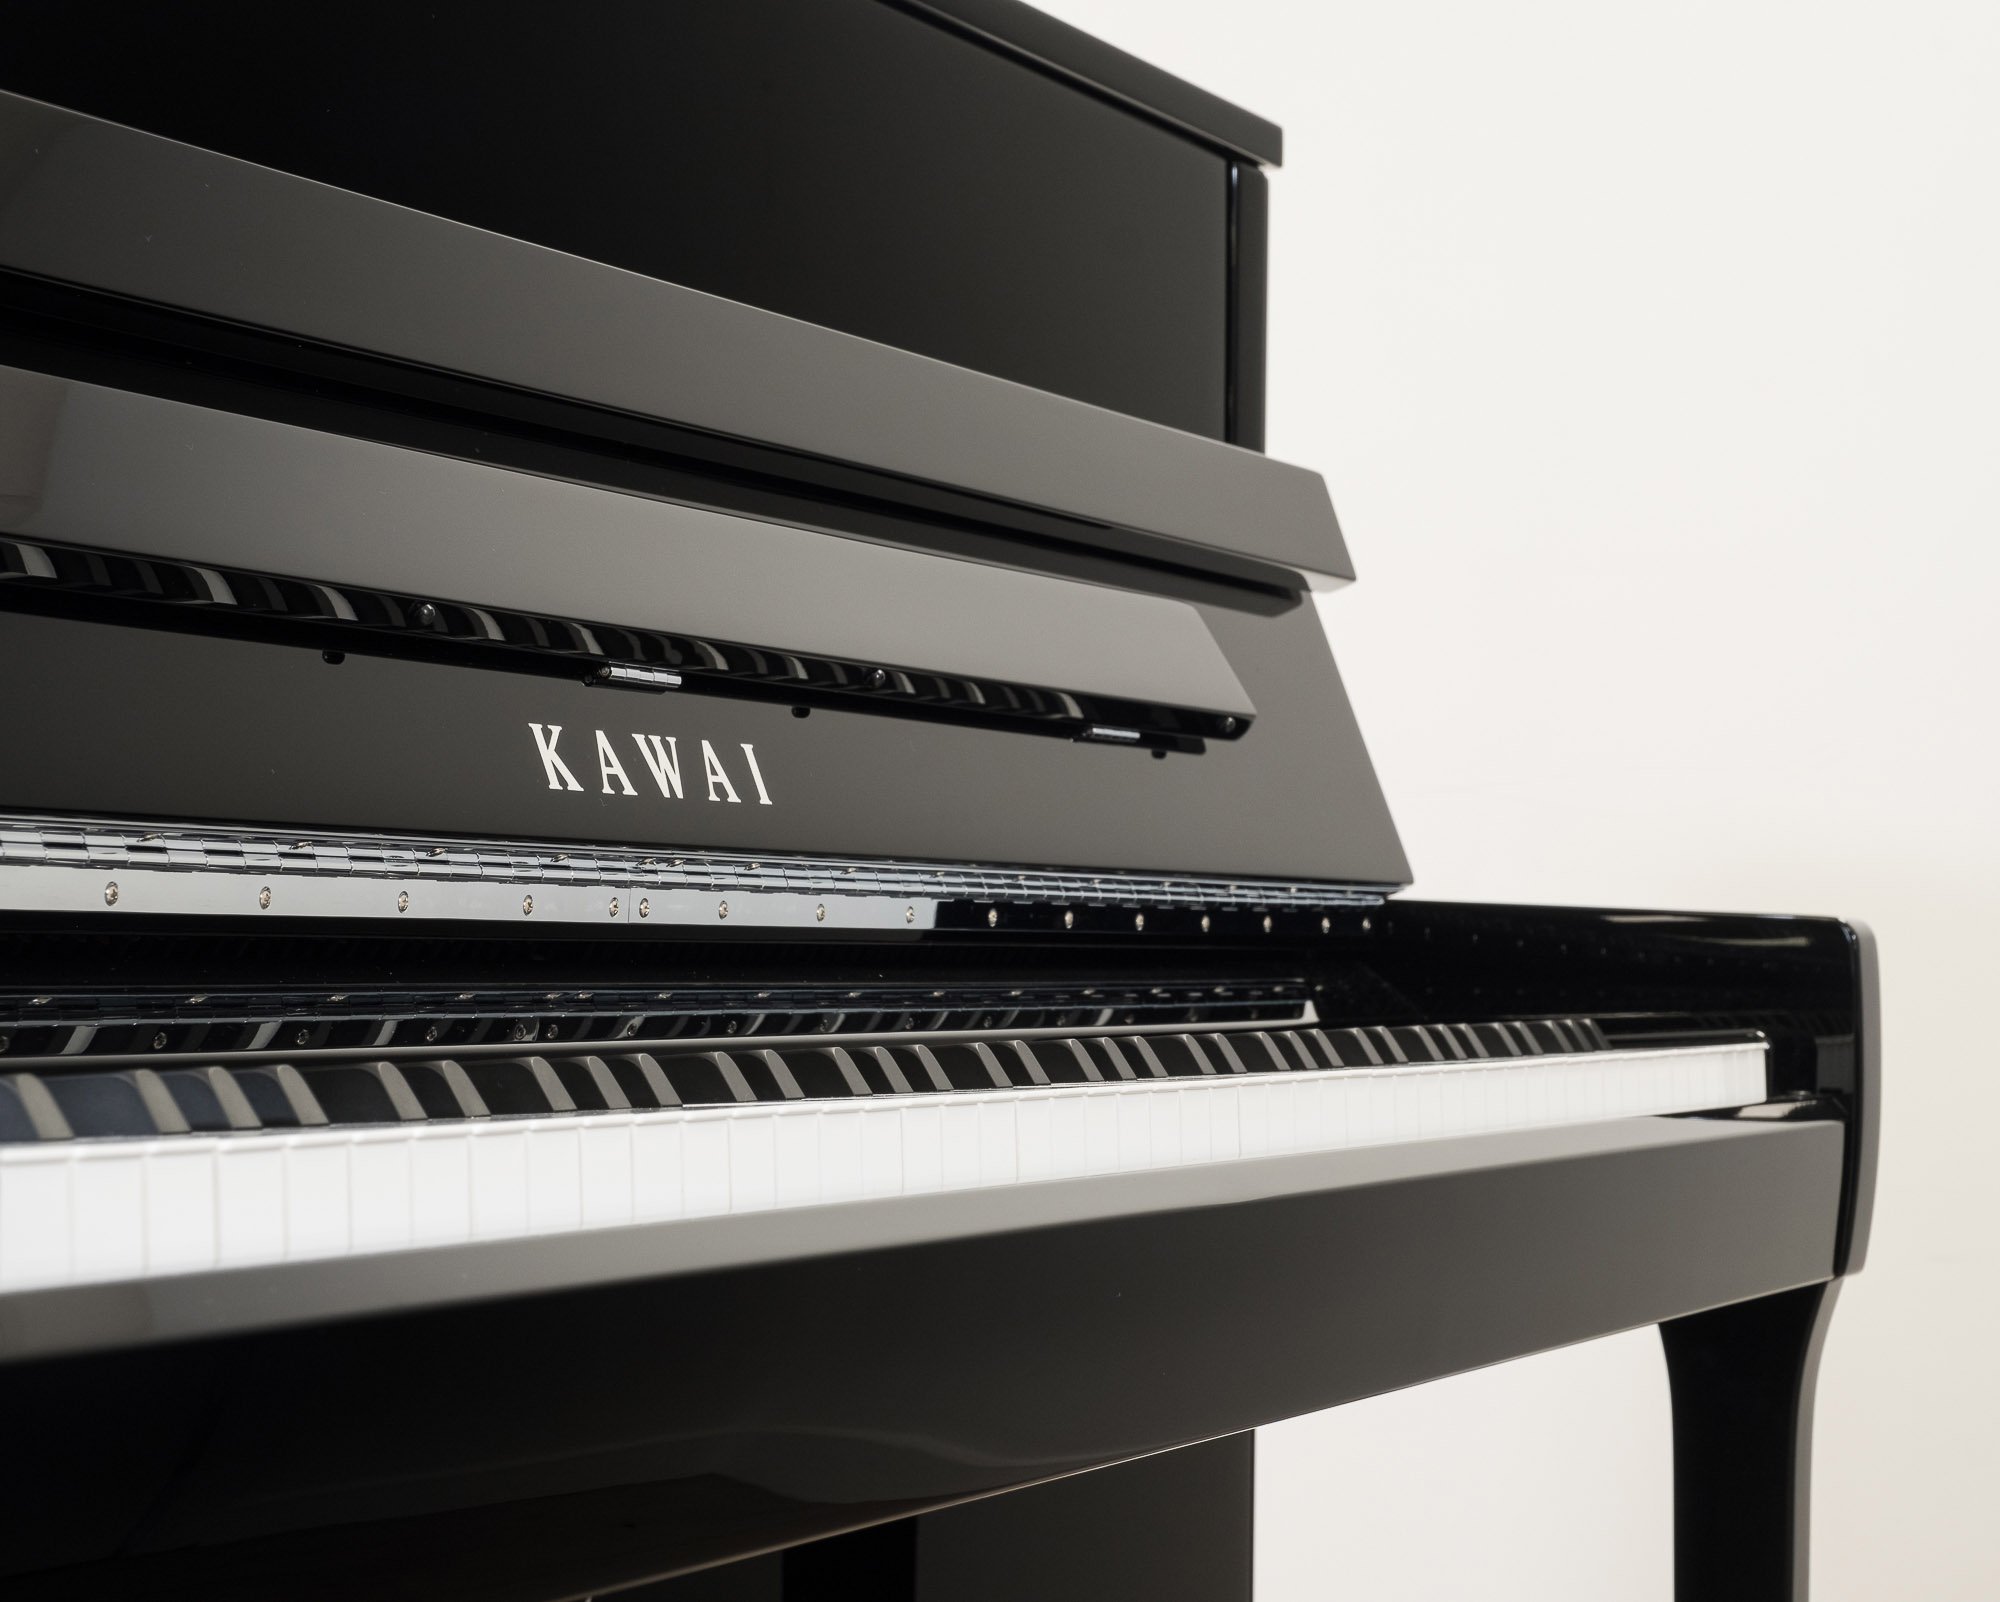 How Many Keys Are On A Standard Acoustic Piano?